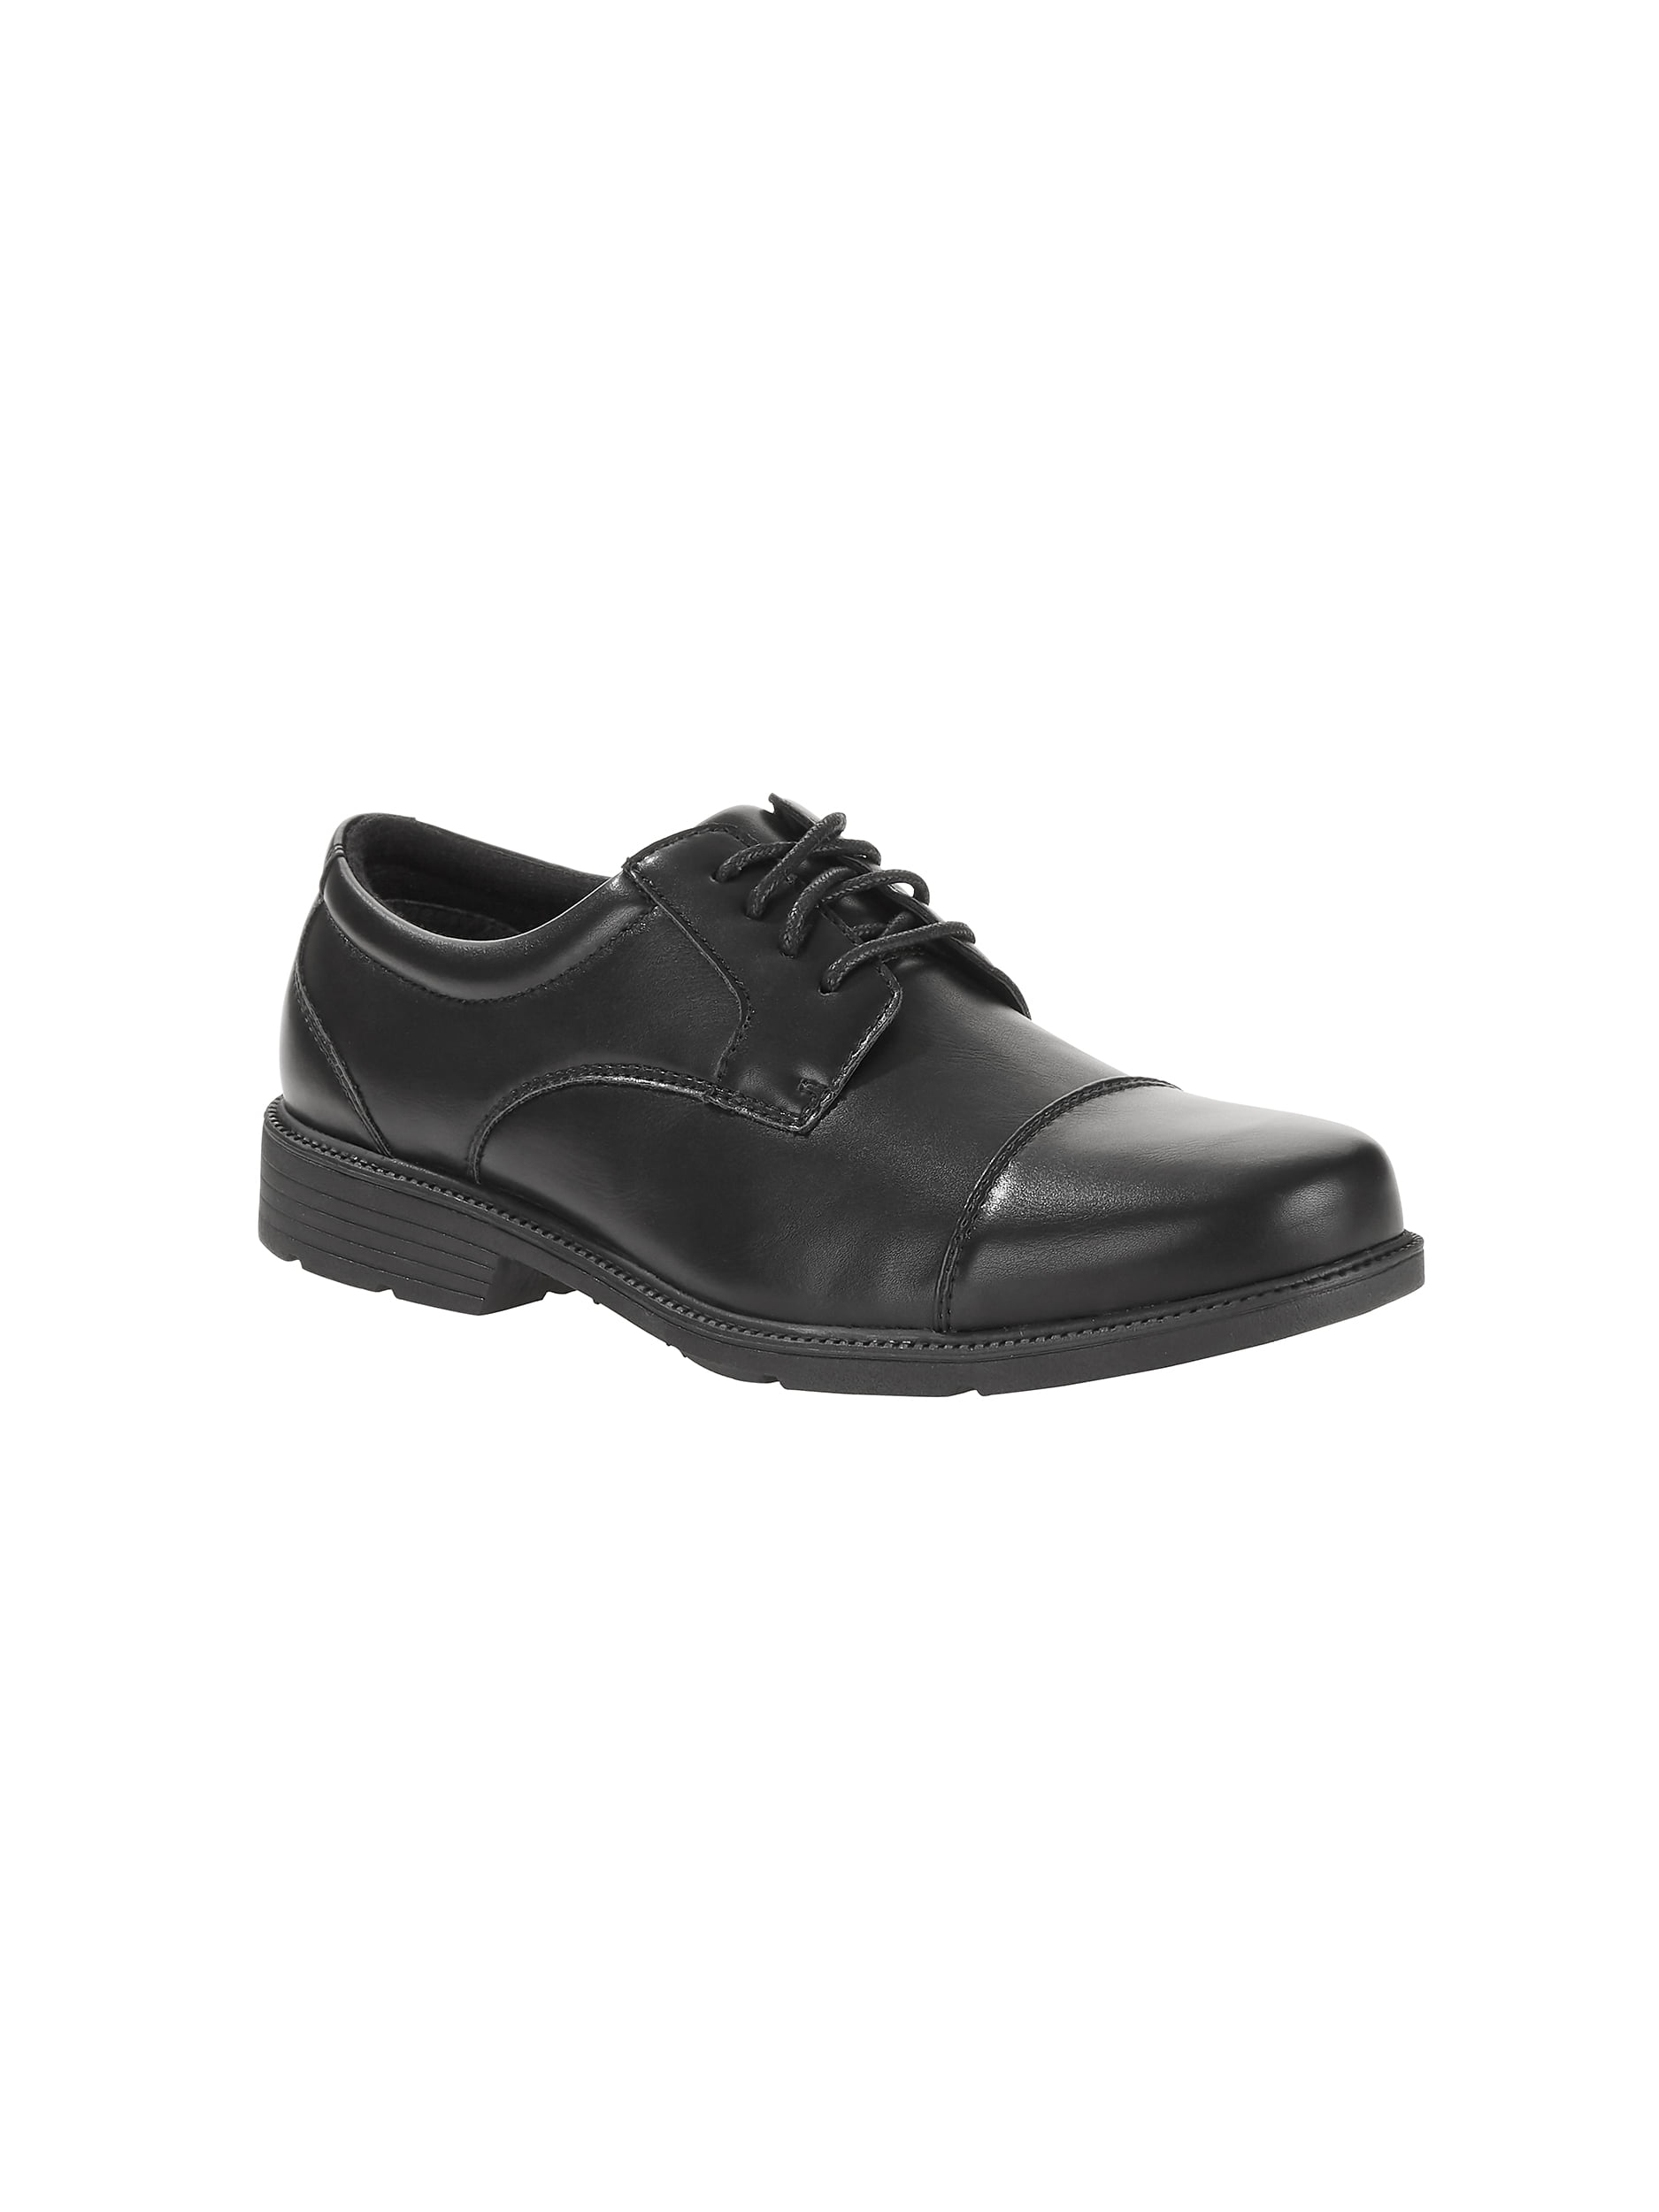 Details about  / Mens Low Top Real Leather Business Shoes Oxfords Work Office Wedding Party New L